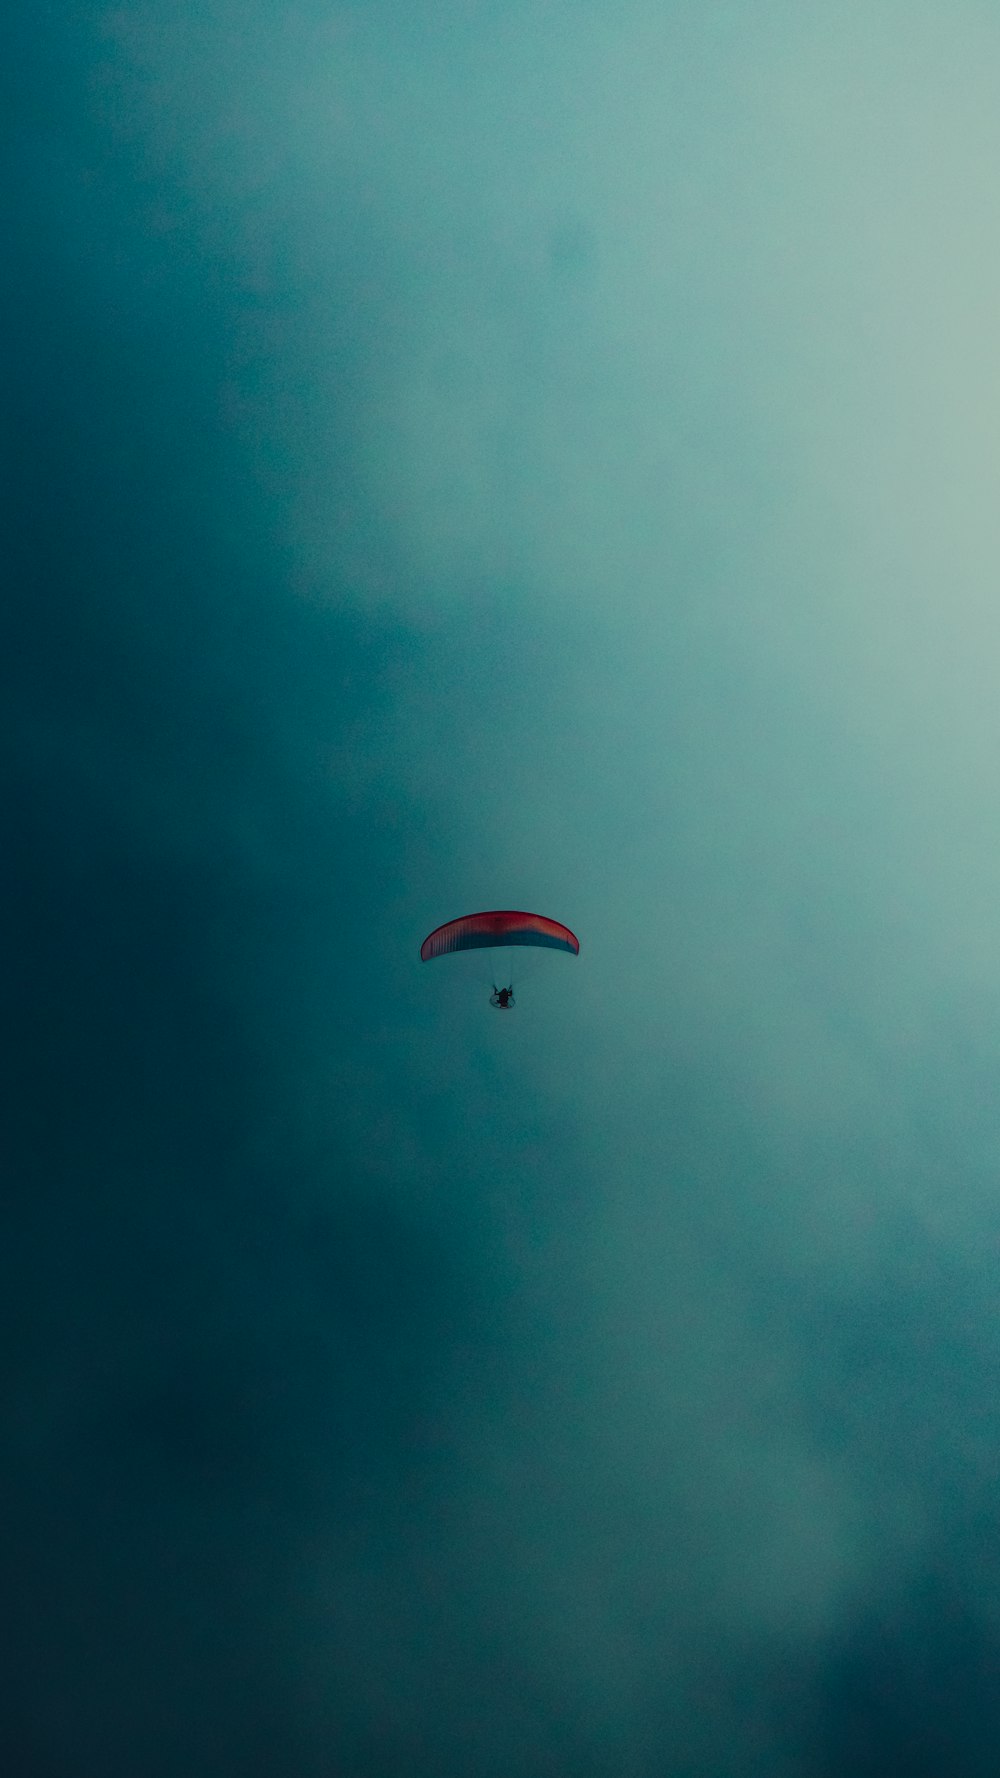 a paraglider flying through a cloudy blue sky